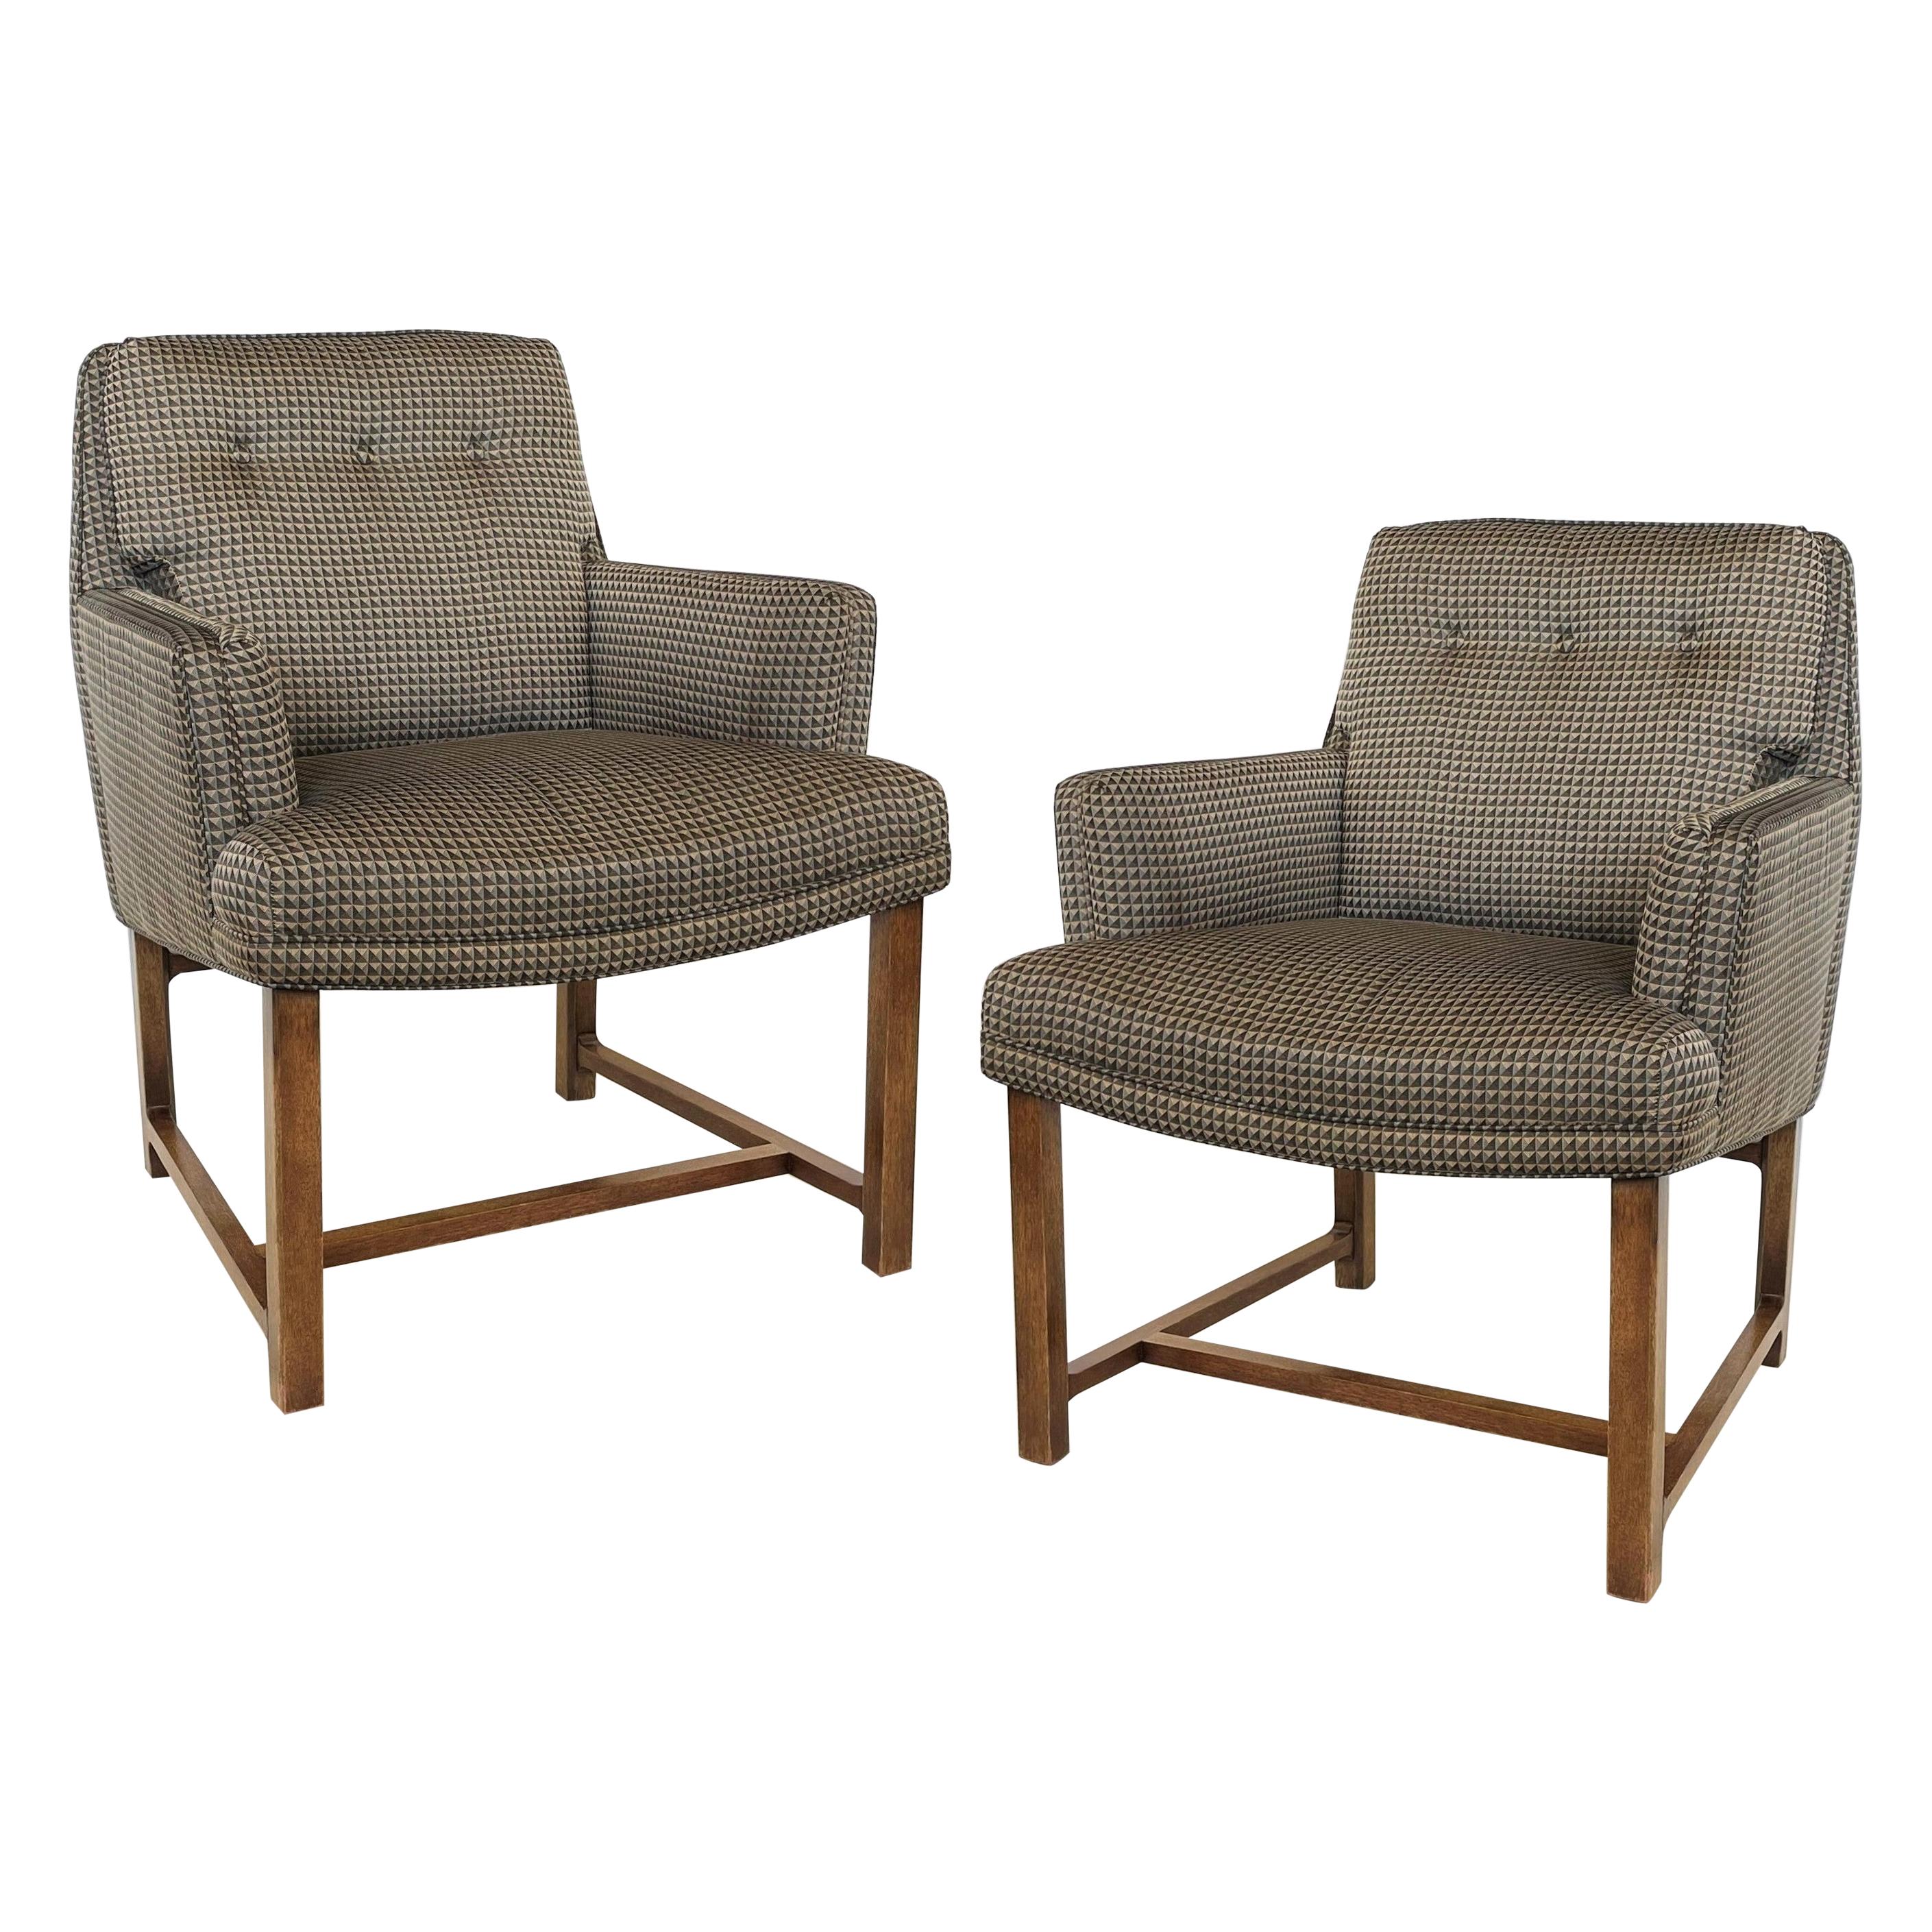 Pair of Edward Wormley for Dunbar Lounge Chairs, 1950's